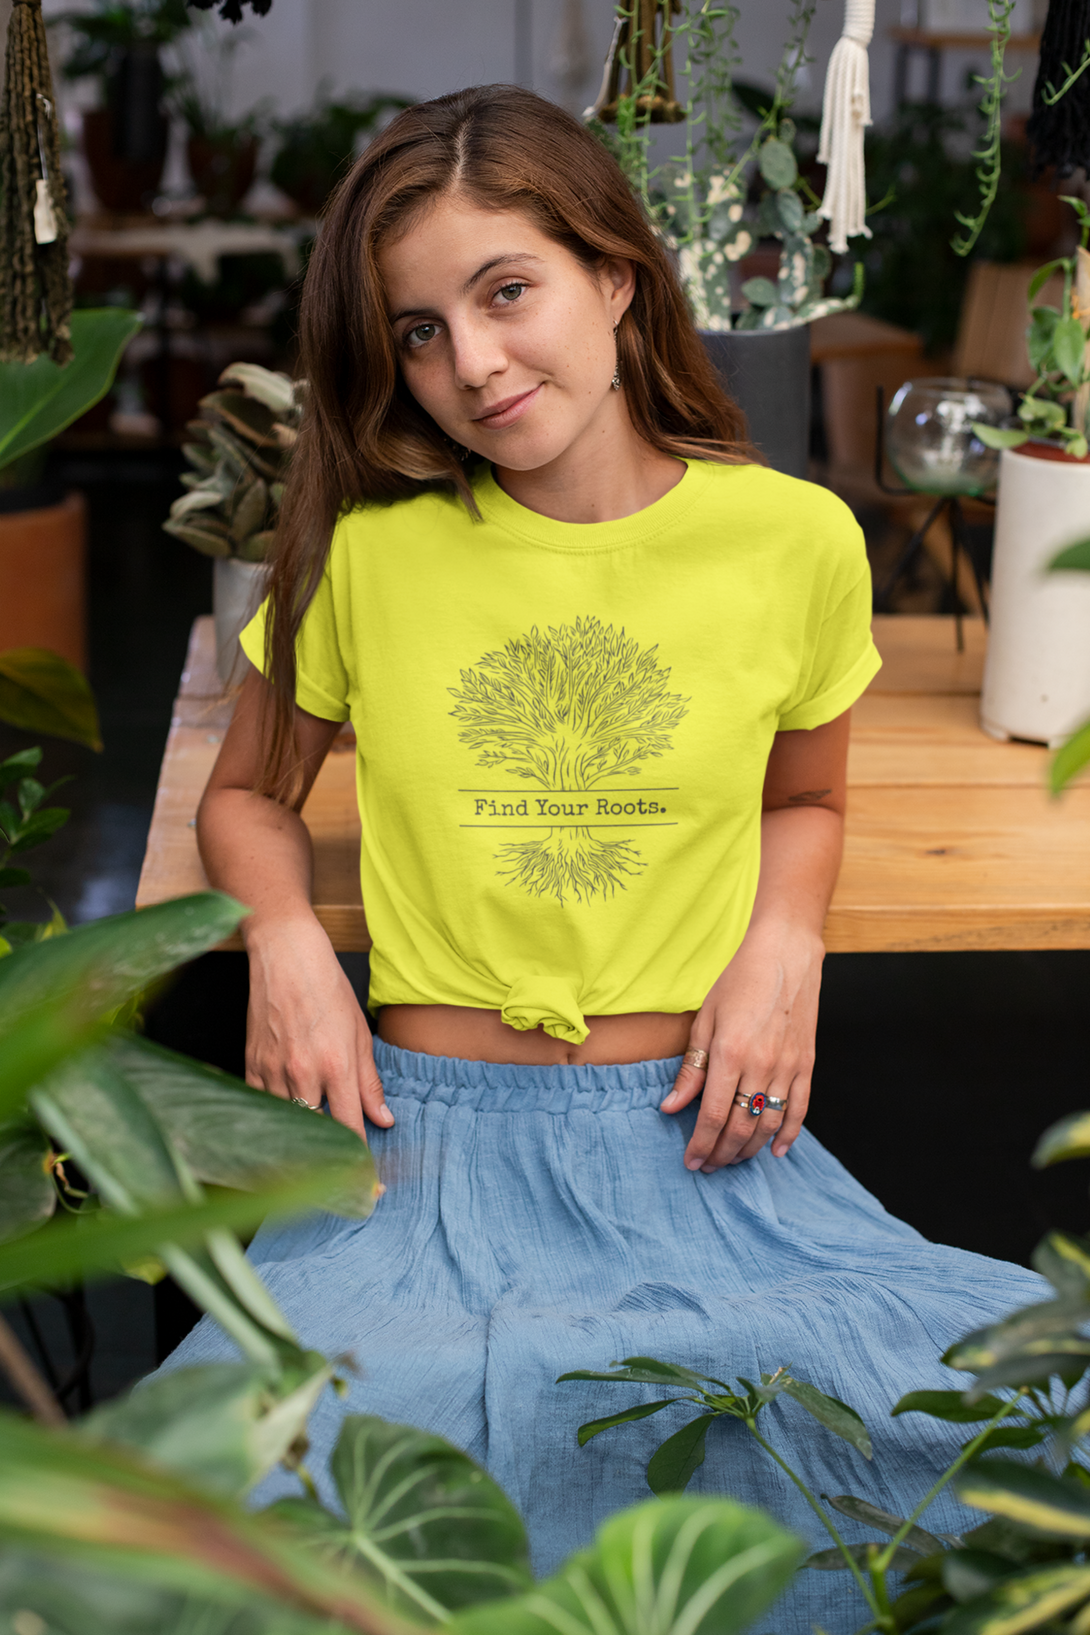 Find Your Roots Printed T-Shirt For Women - WowWaves - 9